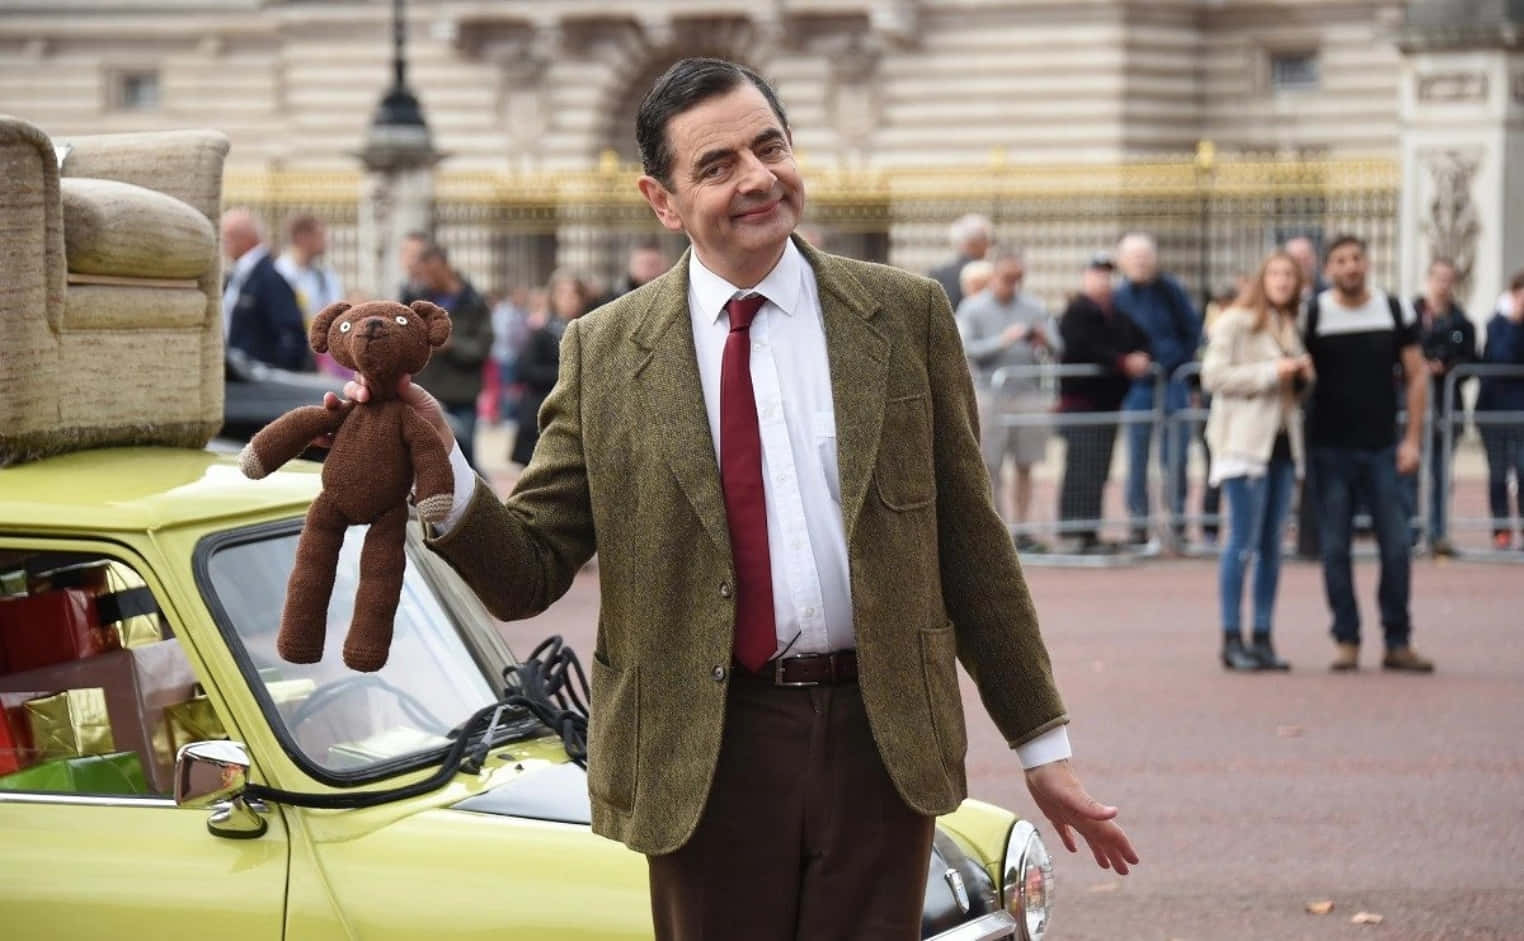 Download Hilarious Mr. Bean striking his iconic pose | Wallpapers.com